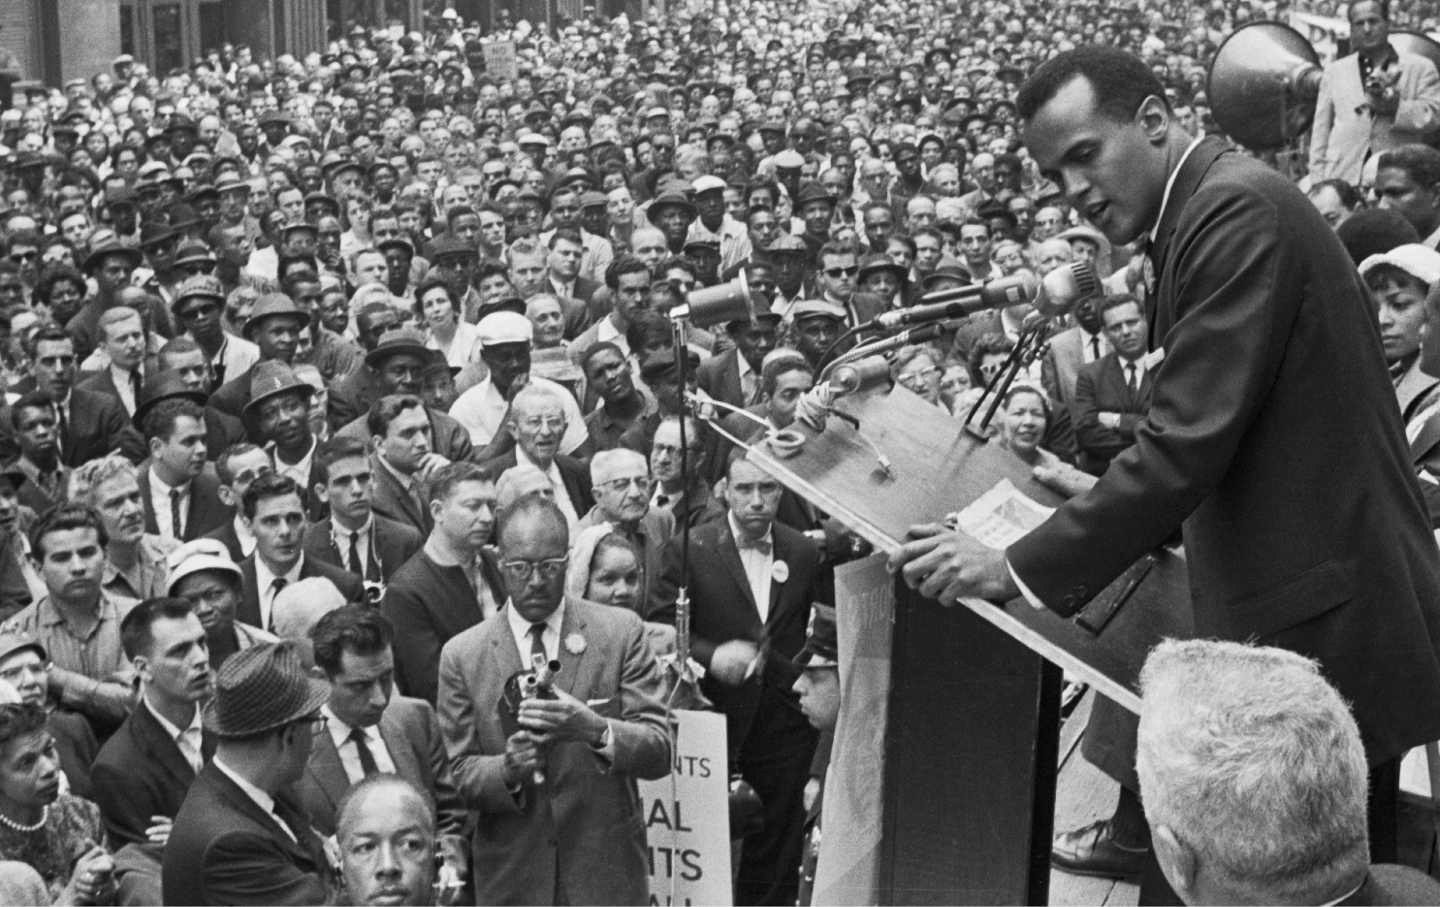 Harry Belafonte singing at a civil rights rally in Manhattan